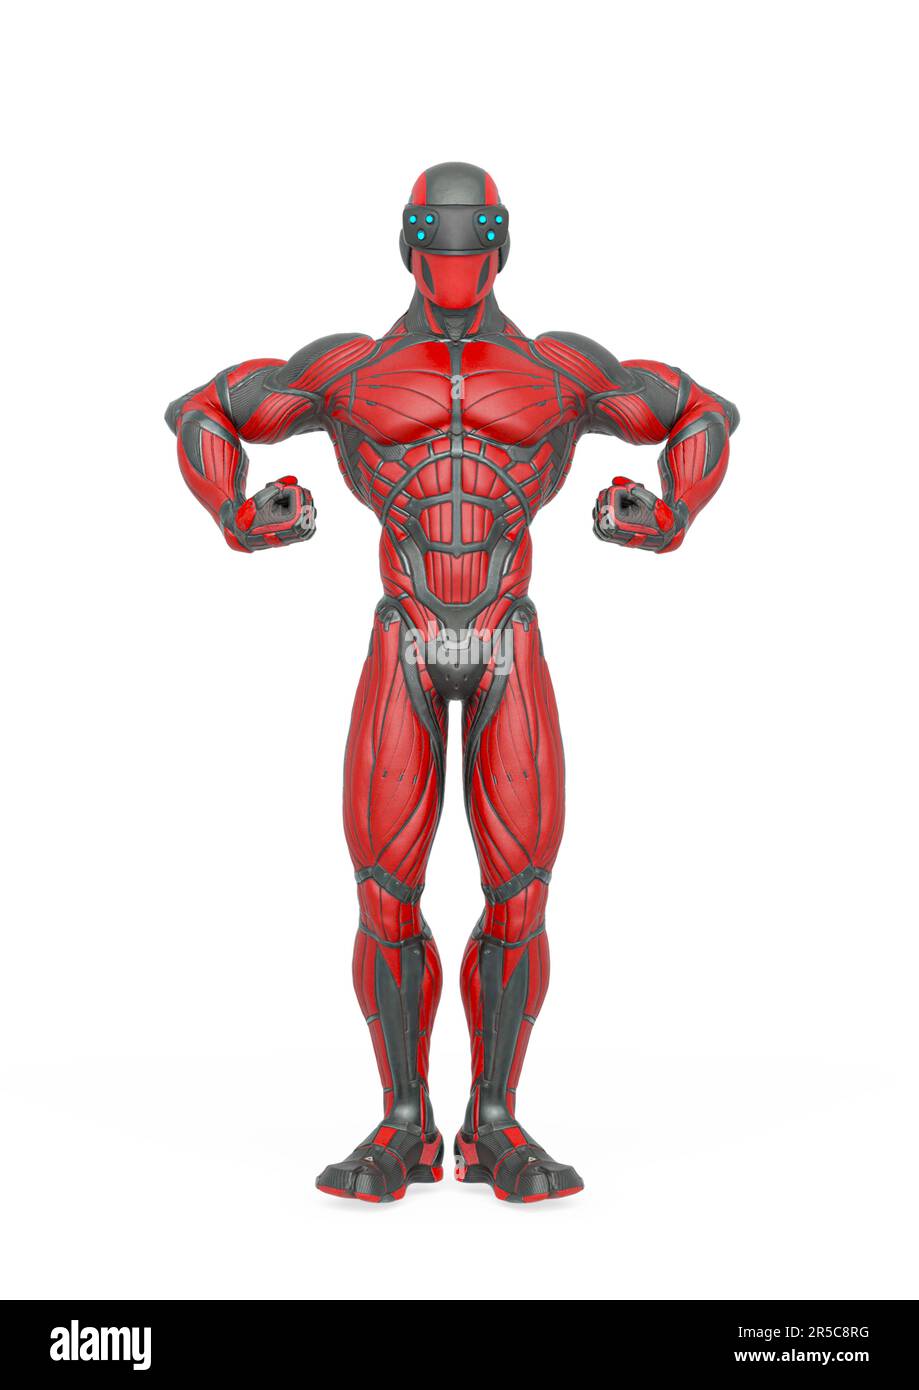 super hero is ready to attack in an exosuit, 3d illustration Stock Photo